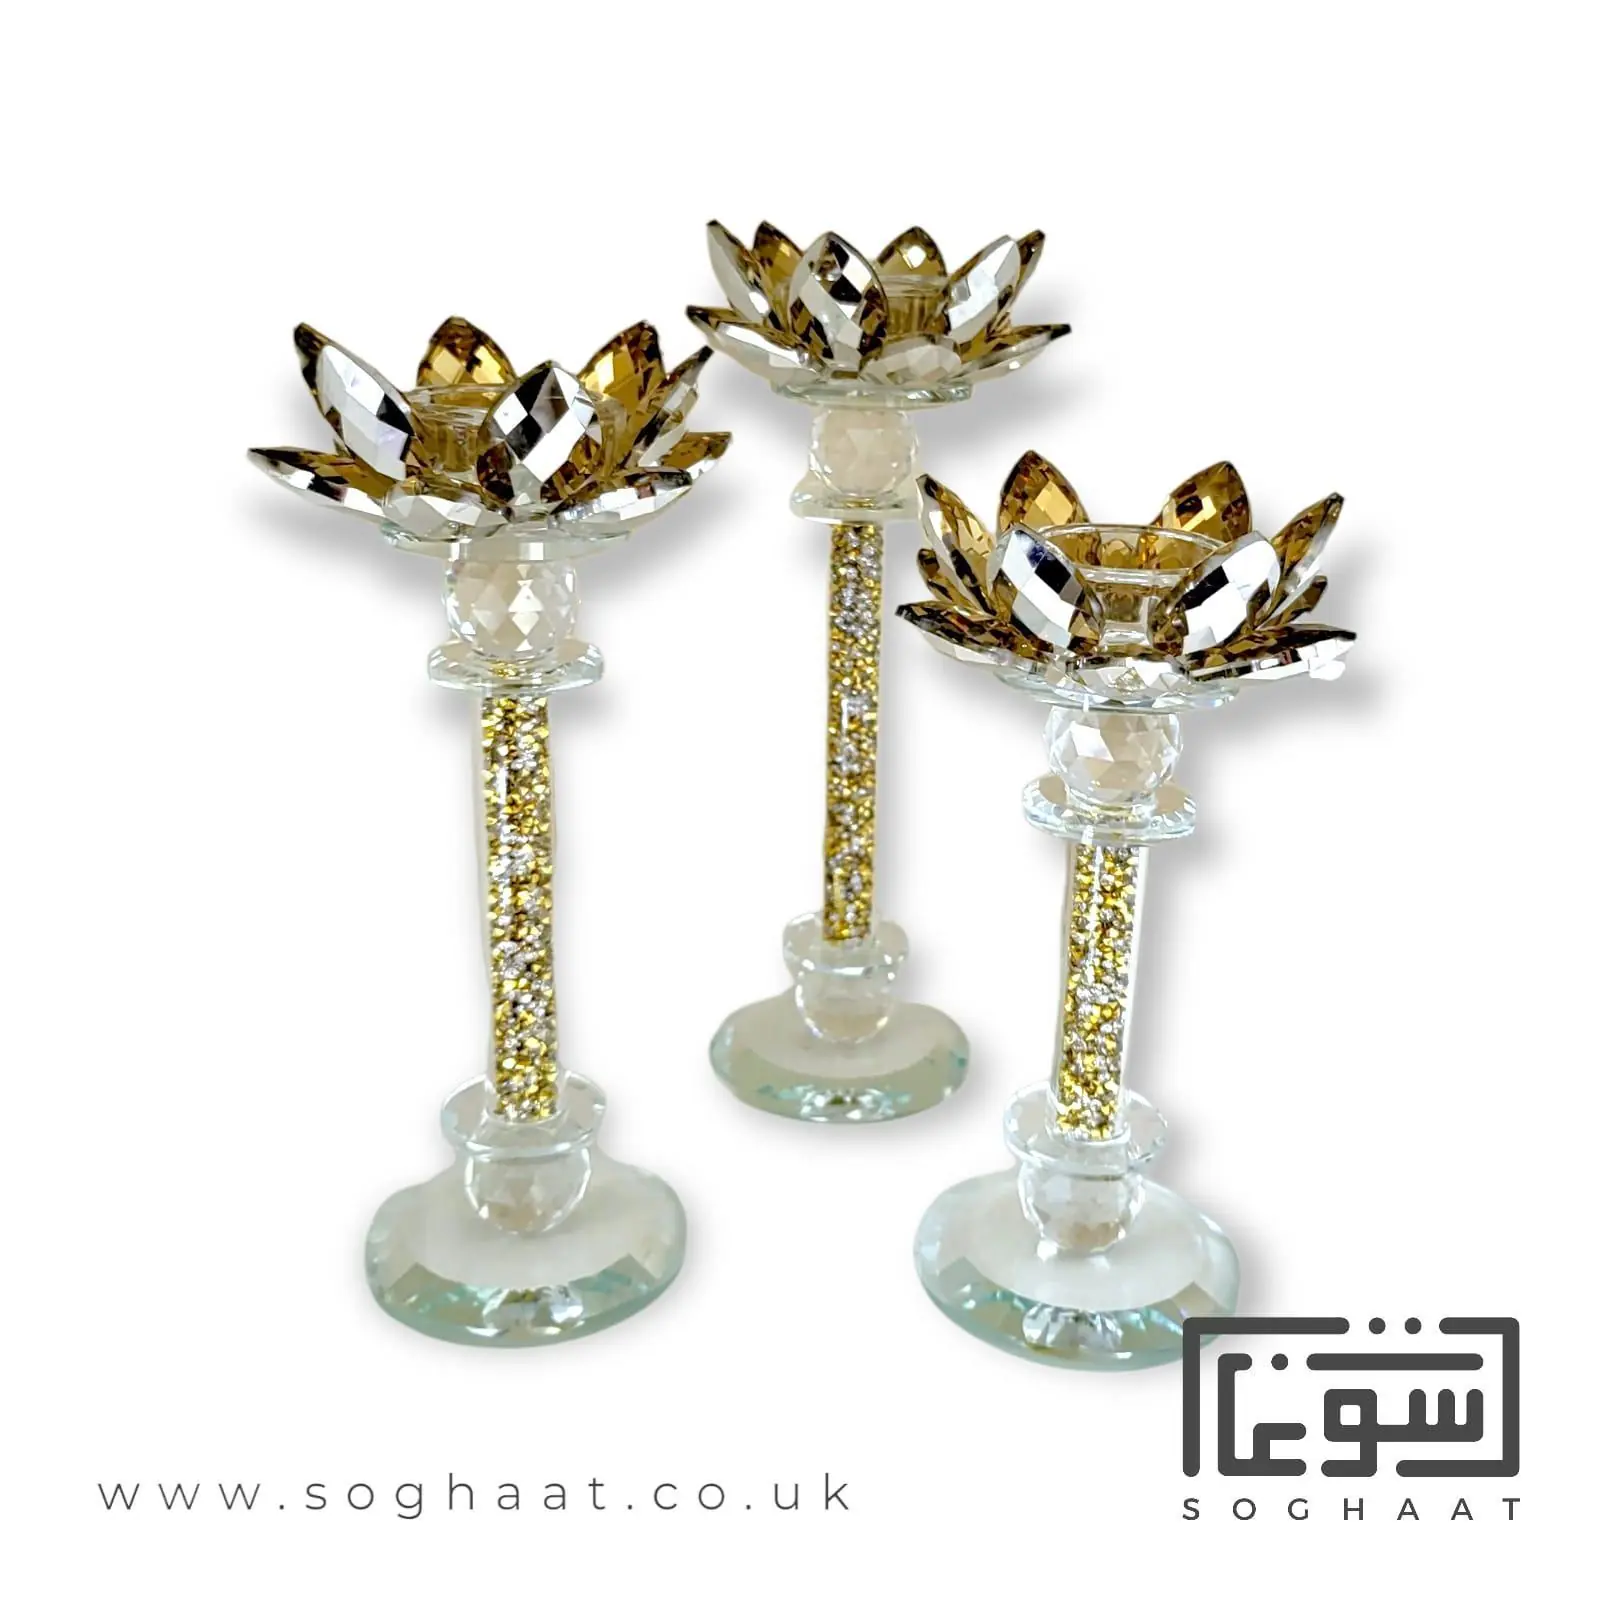 Golden Crystal Lotus And Diamante Candle Holder (Set Of 3), In A Golden Crystal Lotus Flower Design On A Diamante-Filled Stem.